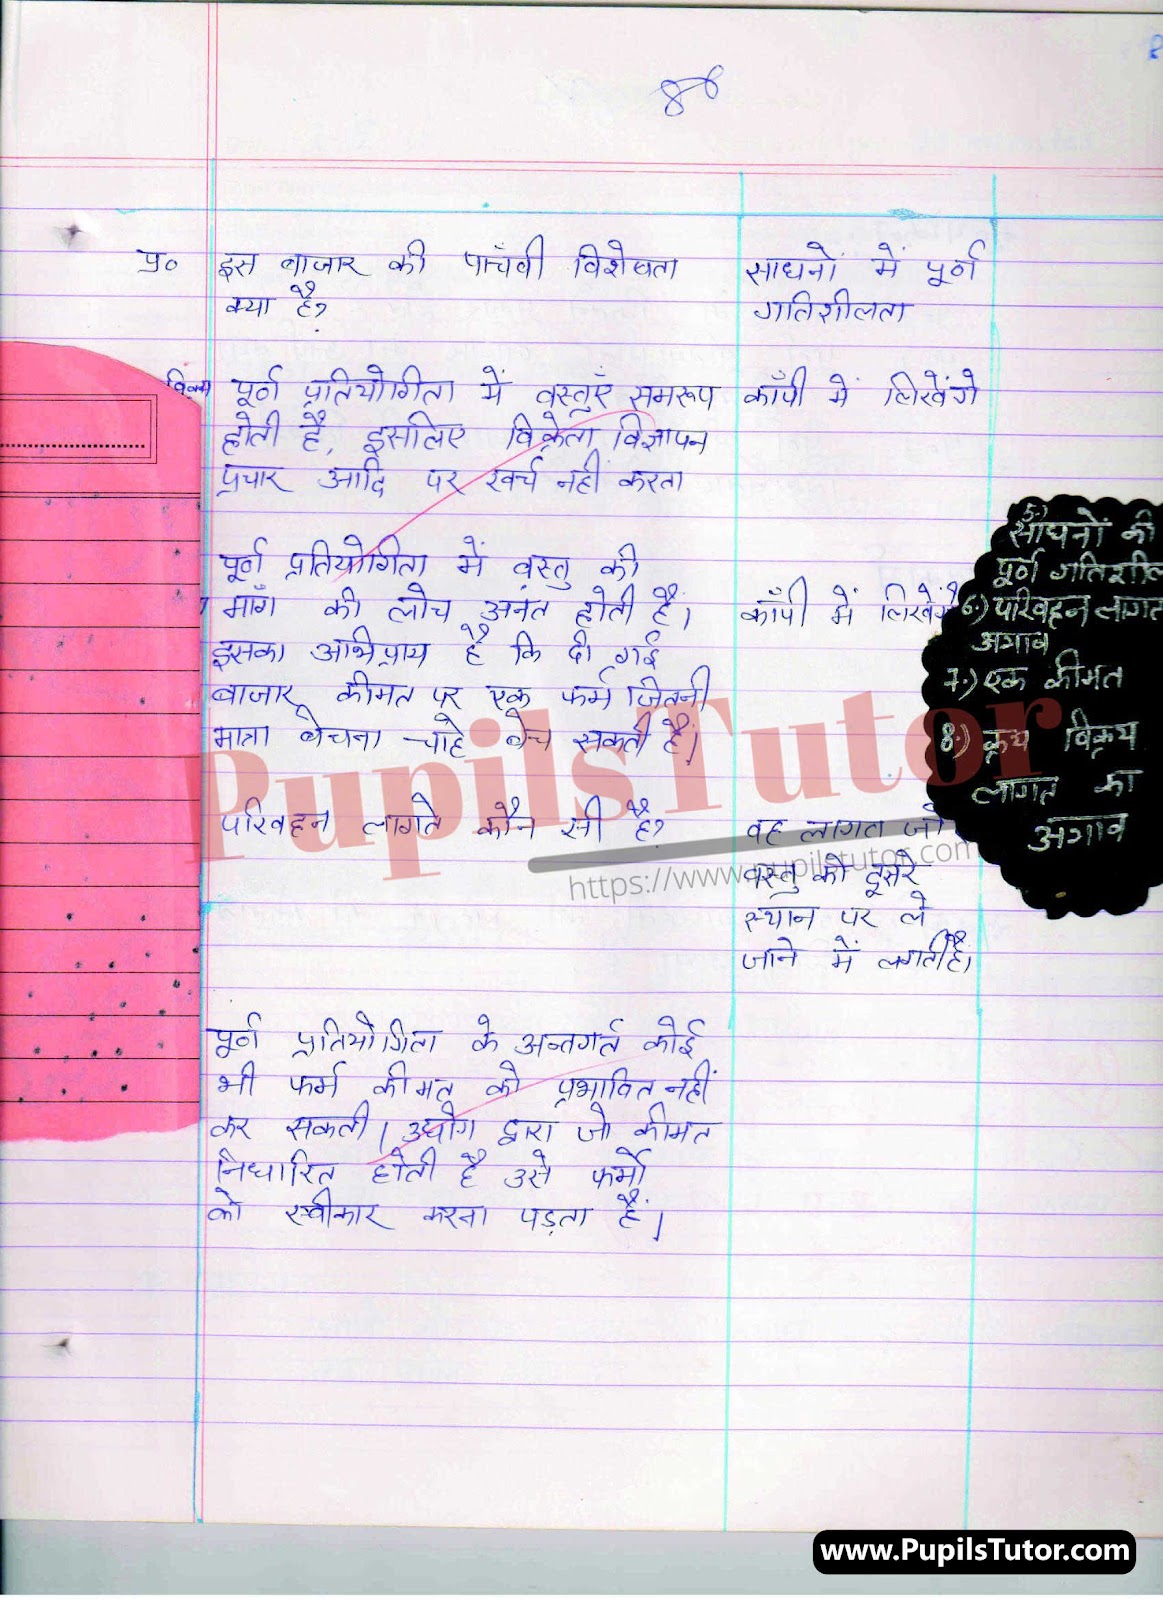 Lesson Plan On Bazar For Class 7 To 12th | Bazar Path Yojna – [Page And Pic Number 5] – https://www.pupilstutor.com/